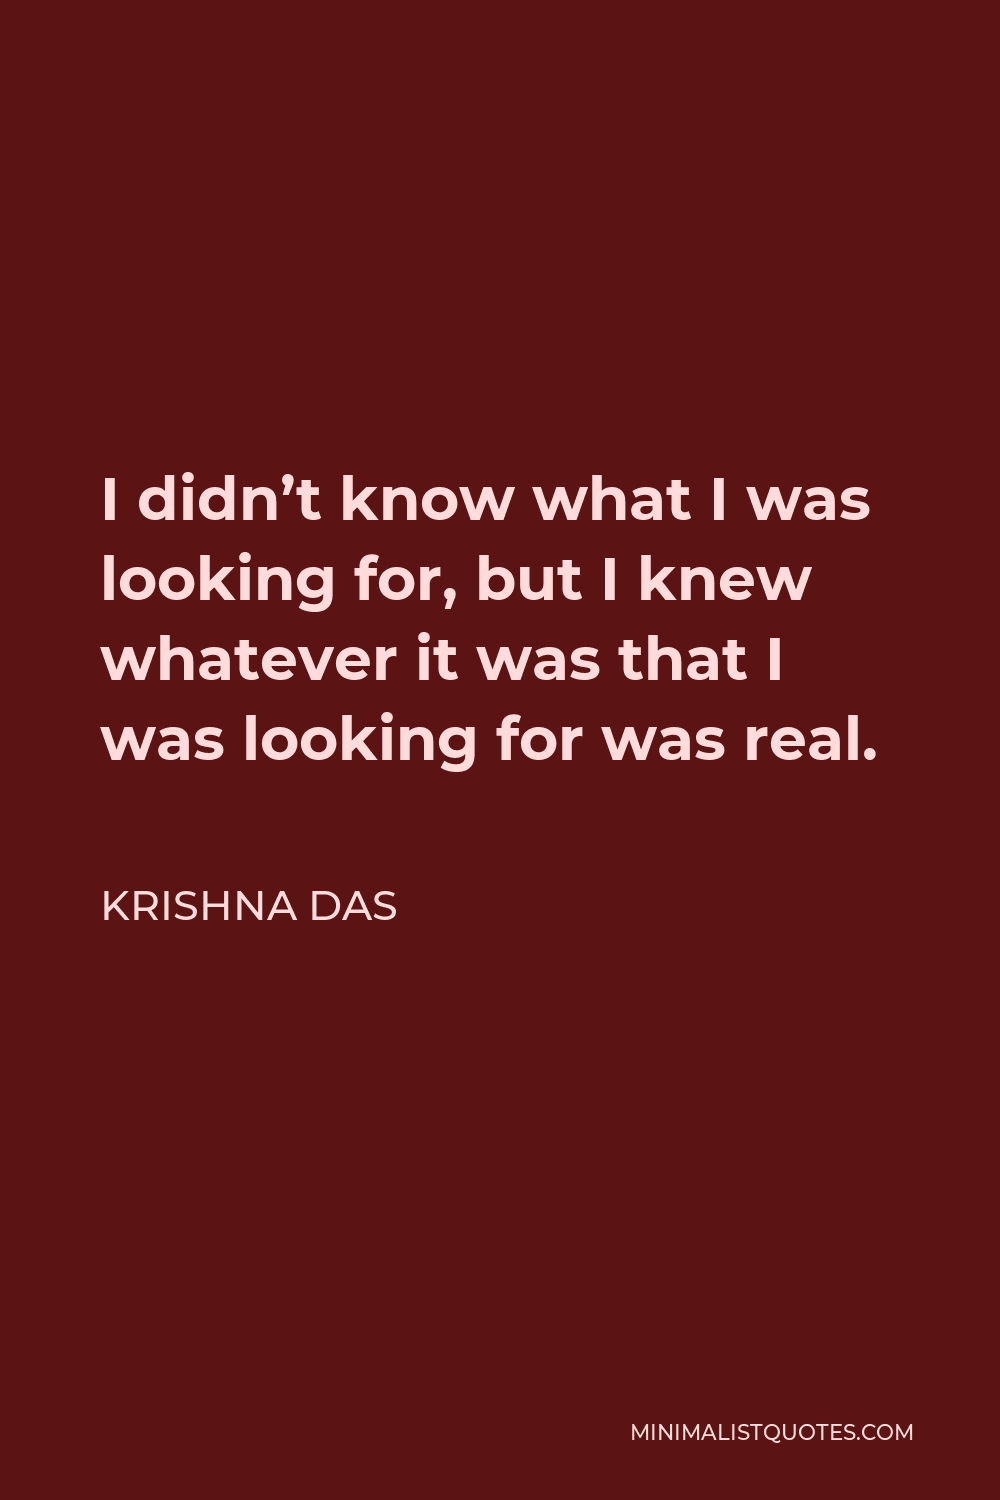 Krishna Das Quote - I didn’t know what I was looking for, but I knew whatever it was that I was looking for was real.